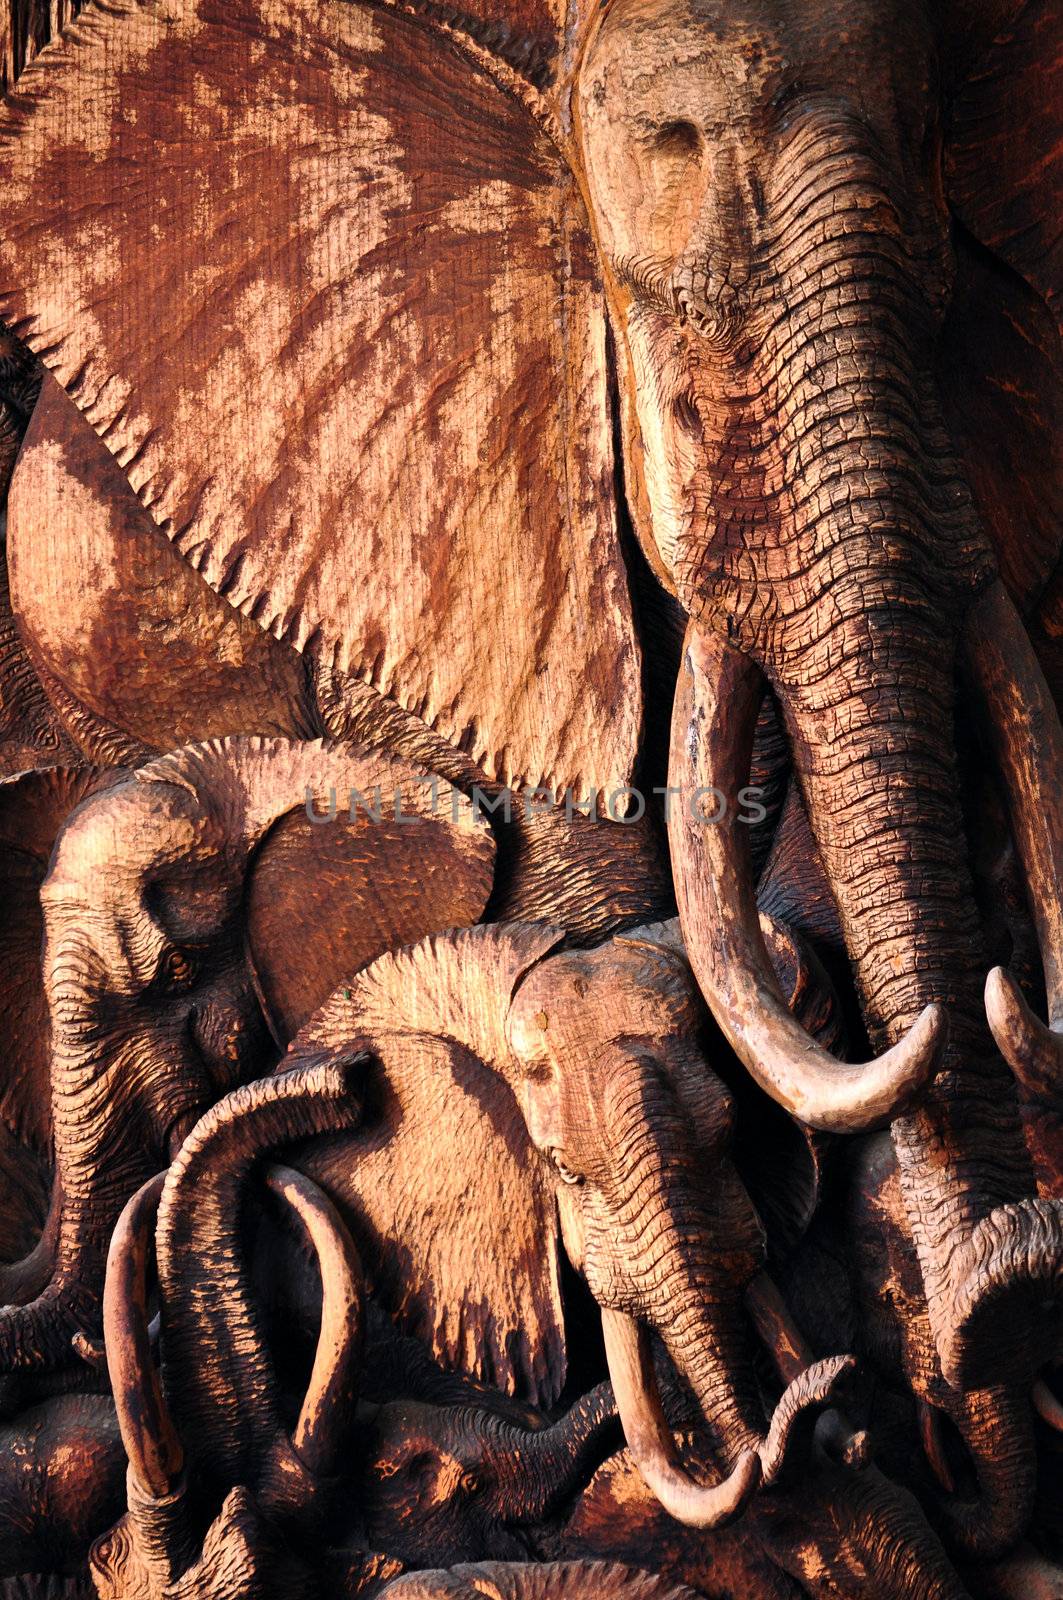 Elephants are the largest living land animals on Earth today.